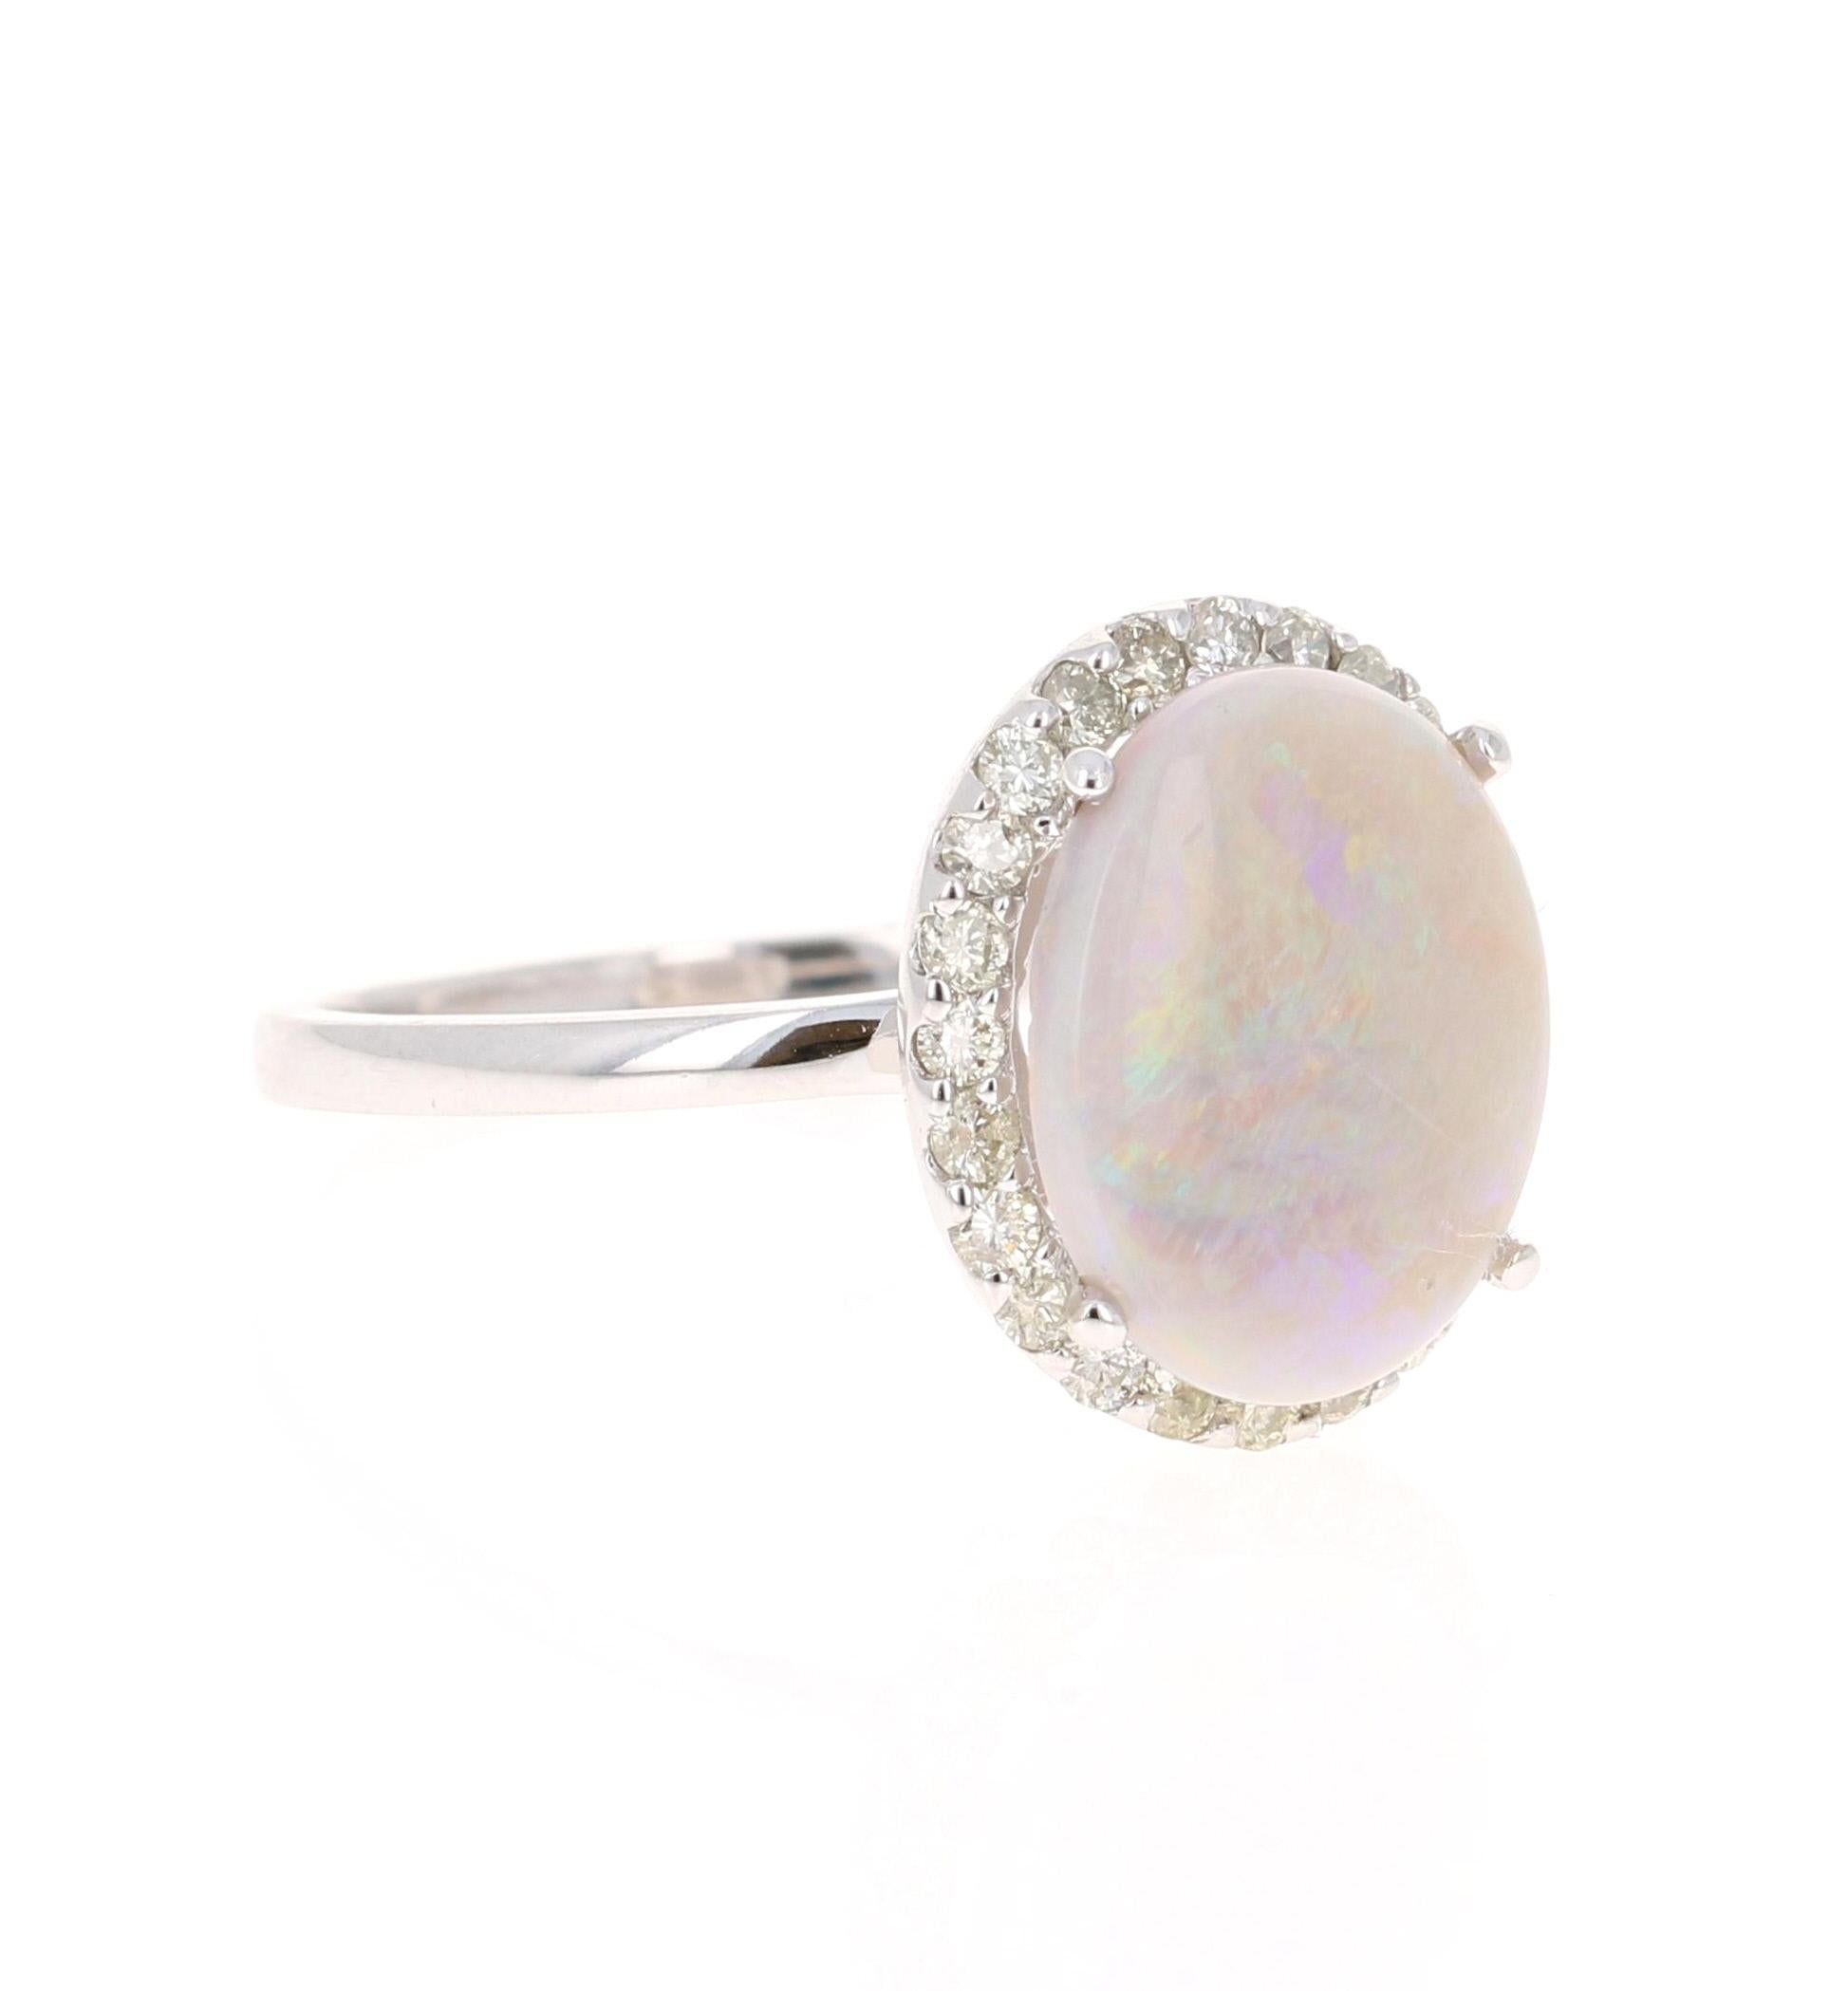 This ring has a cute and simple 2.23 Carat Opal and has 24 Round Cut Diamonds that weigh 0.40 Carats. The total carat weight of the ring is 2.63 Carats. 

The Opal measures at  11 mm x 13 mm (width x length) 

The Opal is semi transparent and has